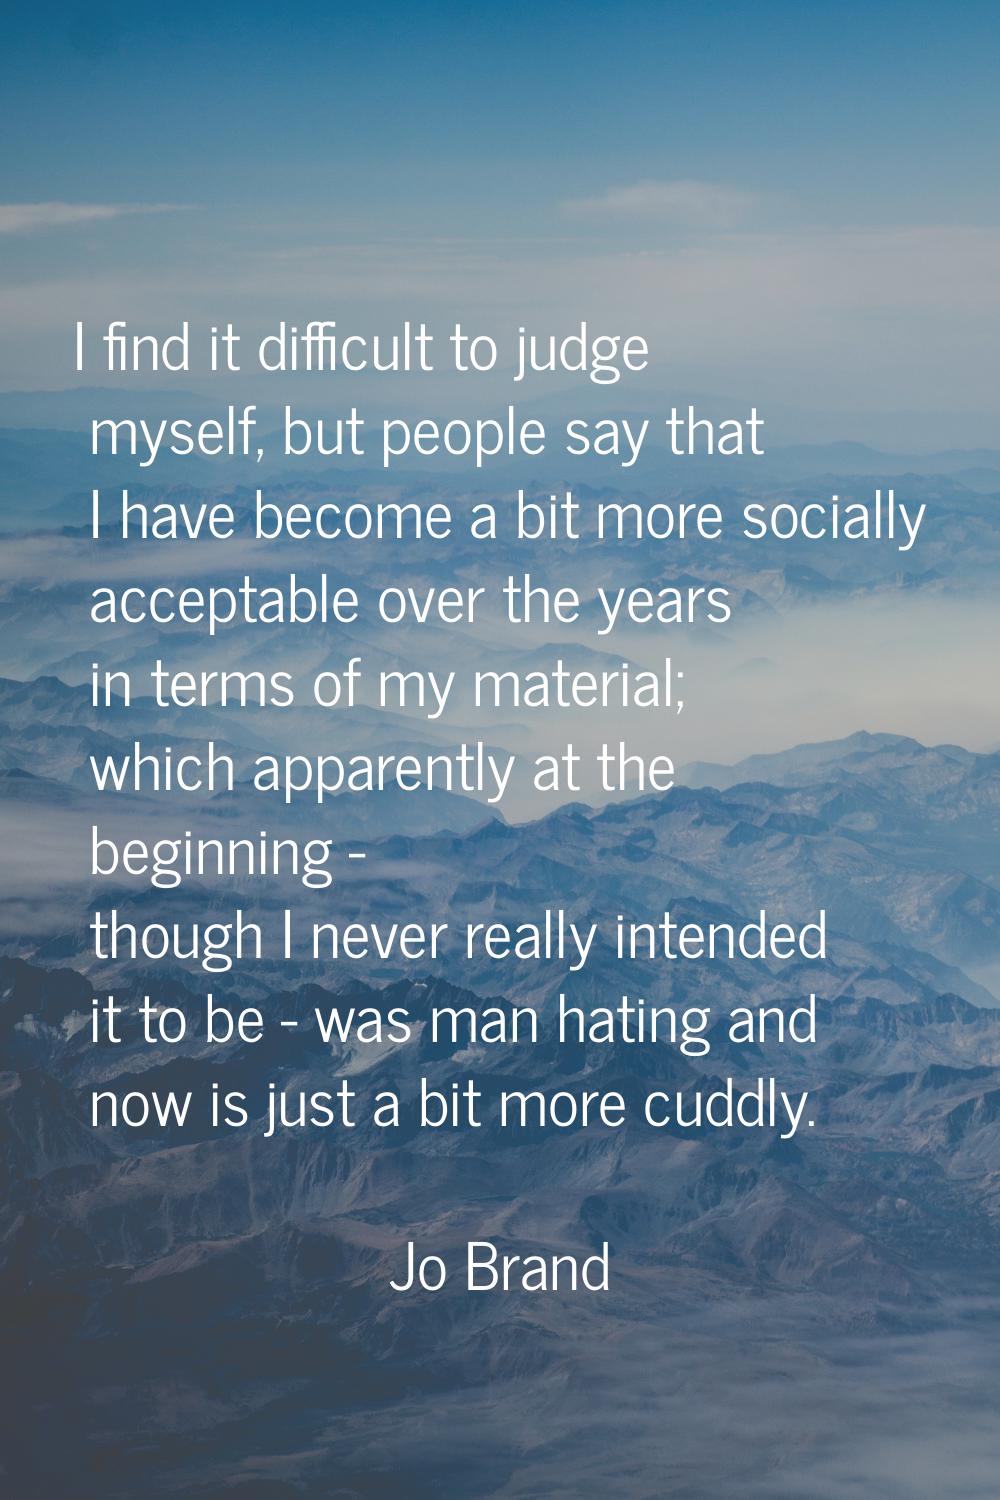 I find it difficult to judge myself, but people say that I have become a bit more socially acceptab